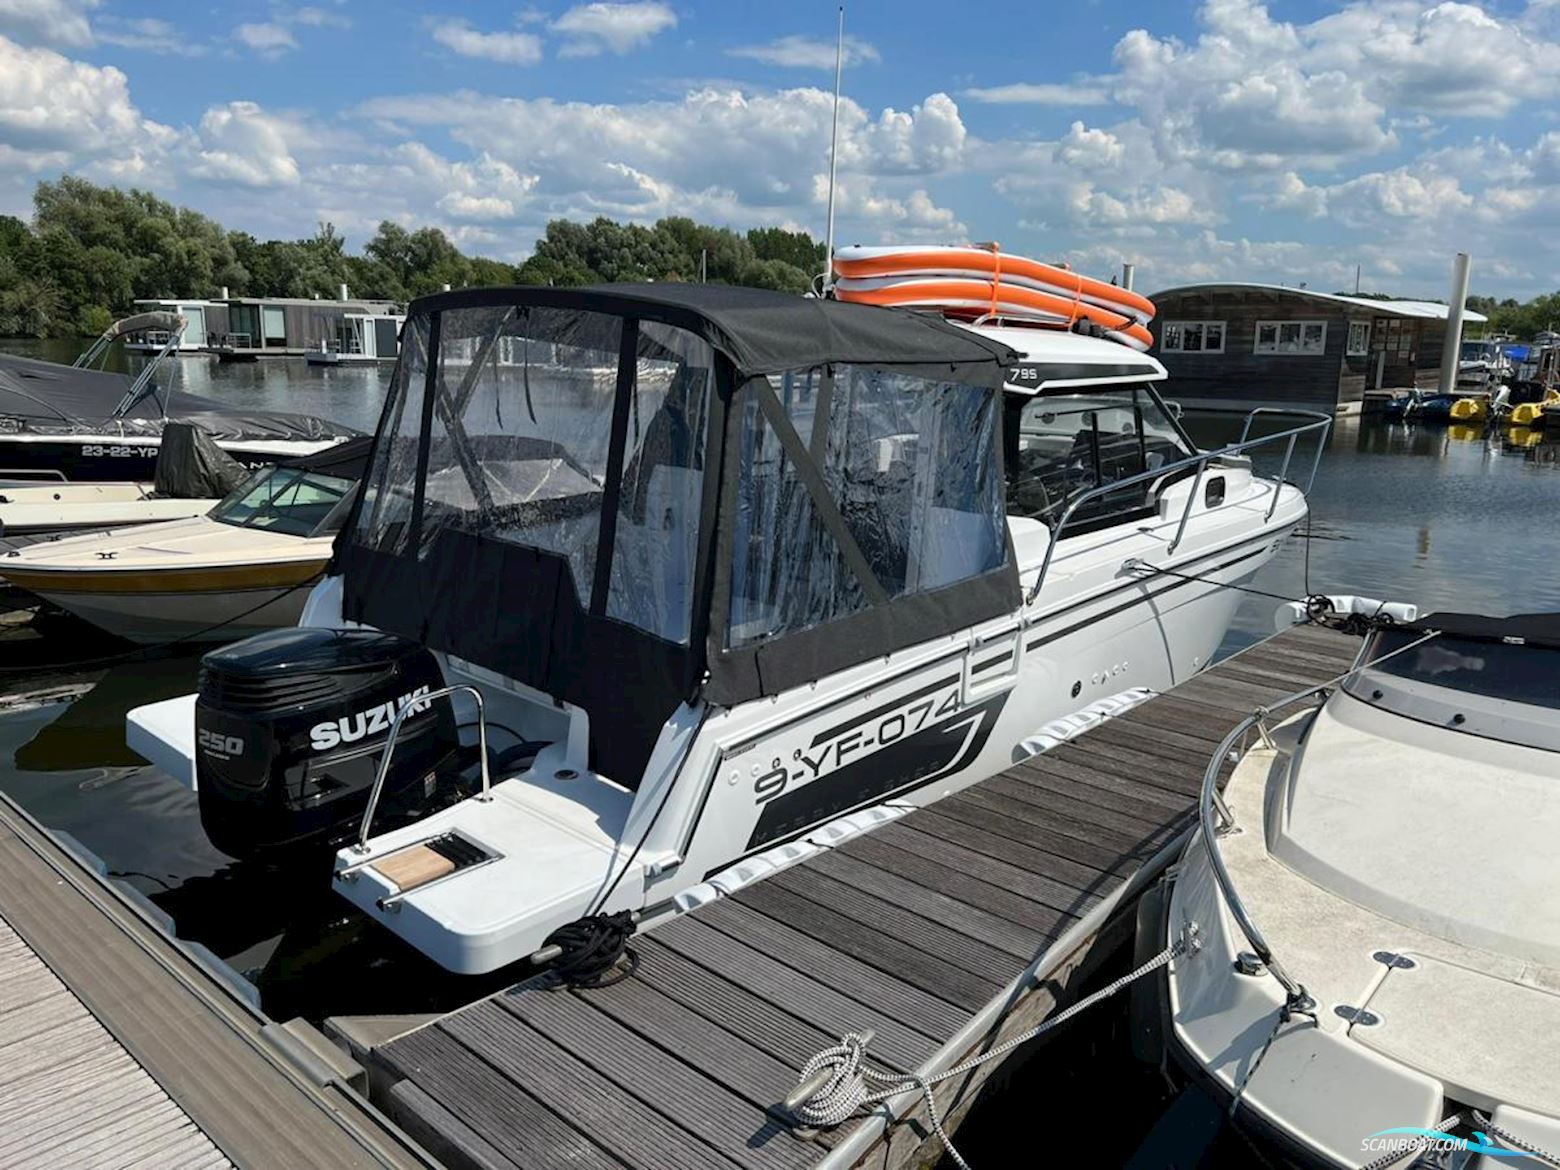 Jeanneau Merry Fisher 795 Serie 2 Motor boat 2022, with Suzuki engine, The Netherlands